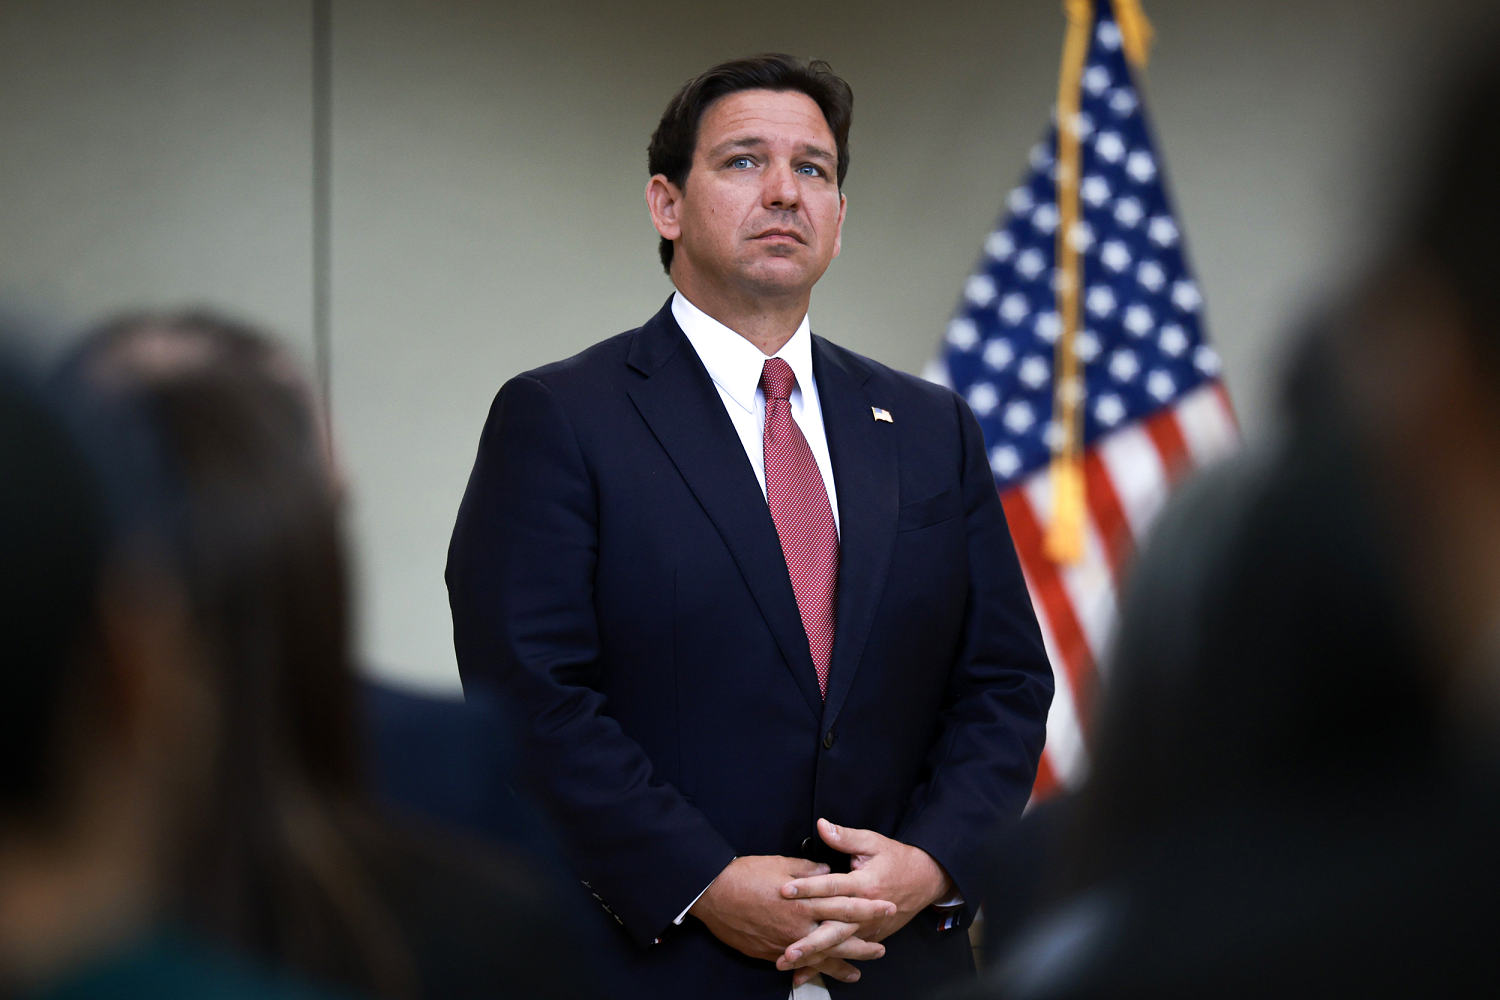 DeSantis signs bill restricting challenges to books in public schools